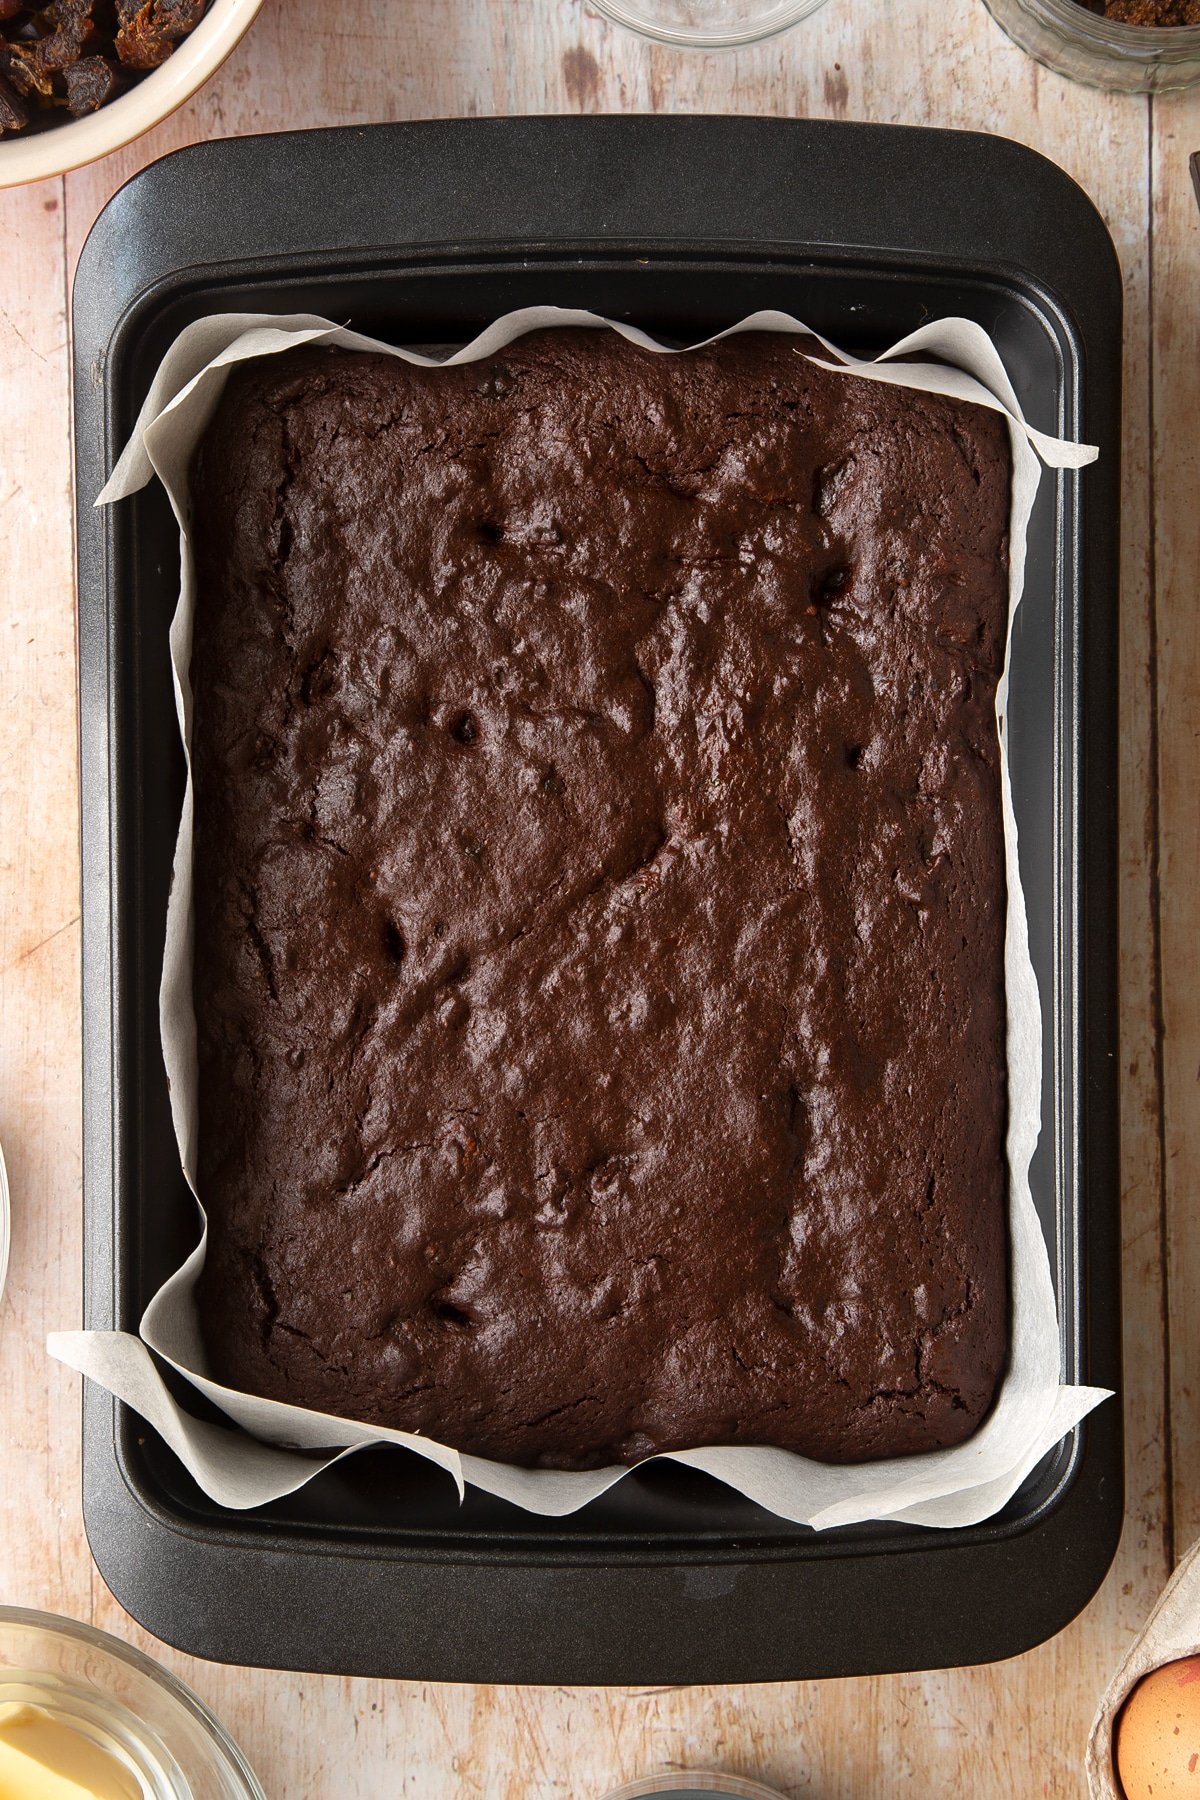 A rectangular tin lined with baking paper and containing freshly baked whole grain brownies. Ingredients to make whole grain brownies surround the tin.